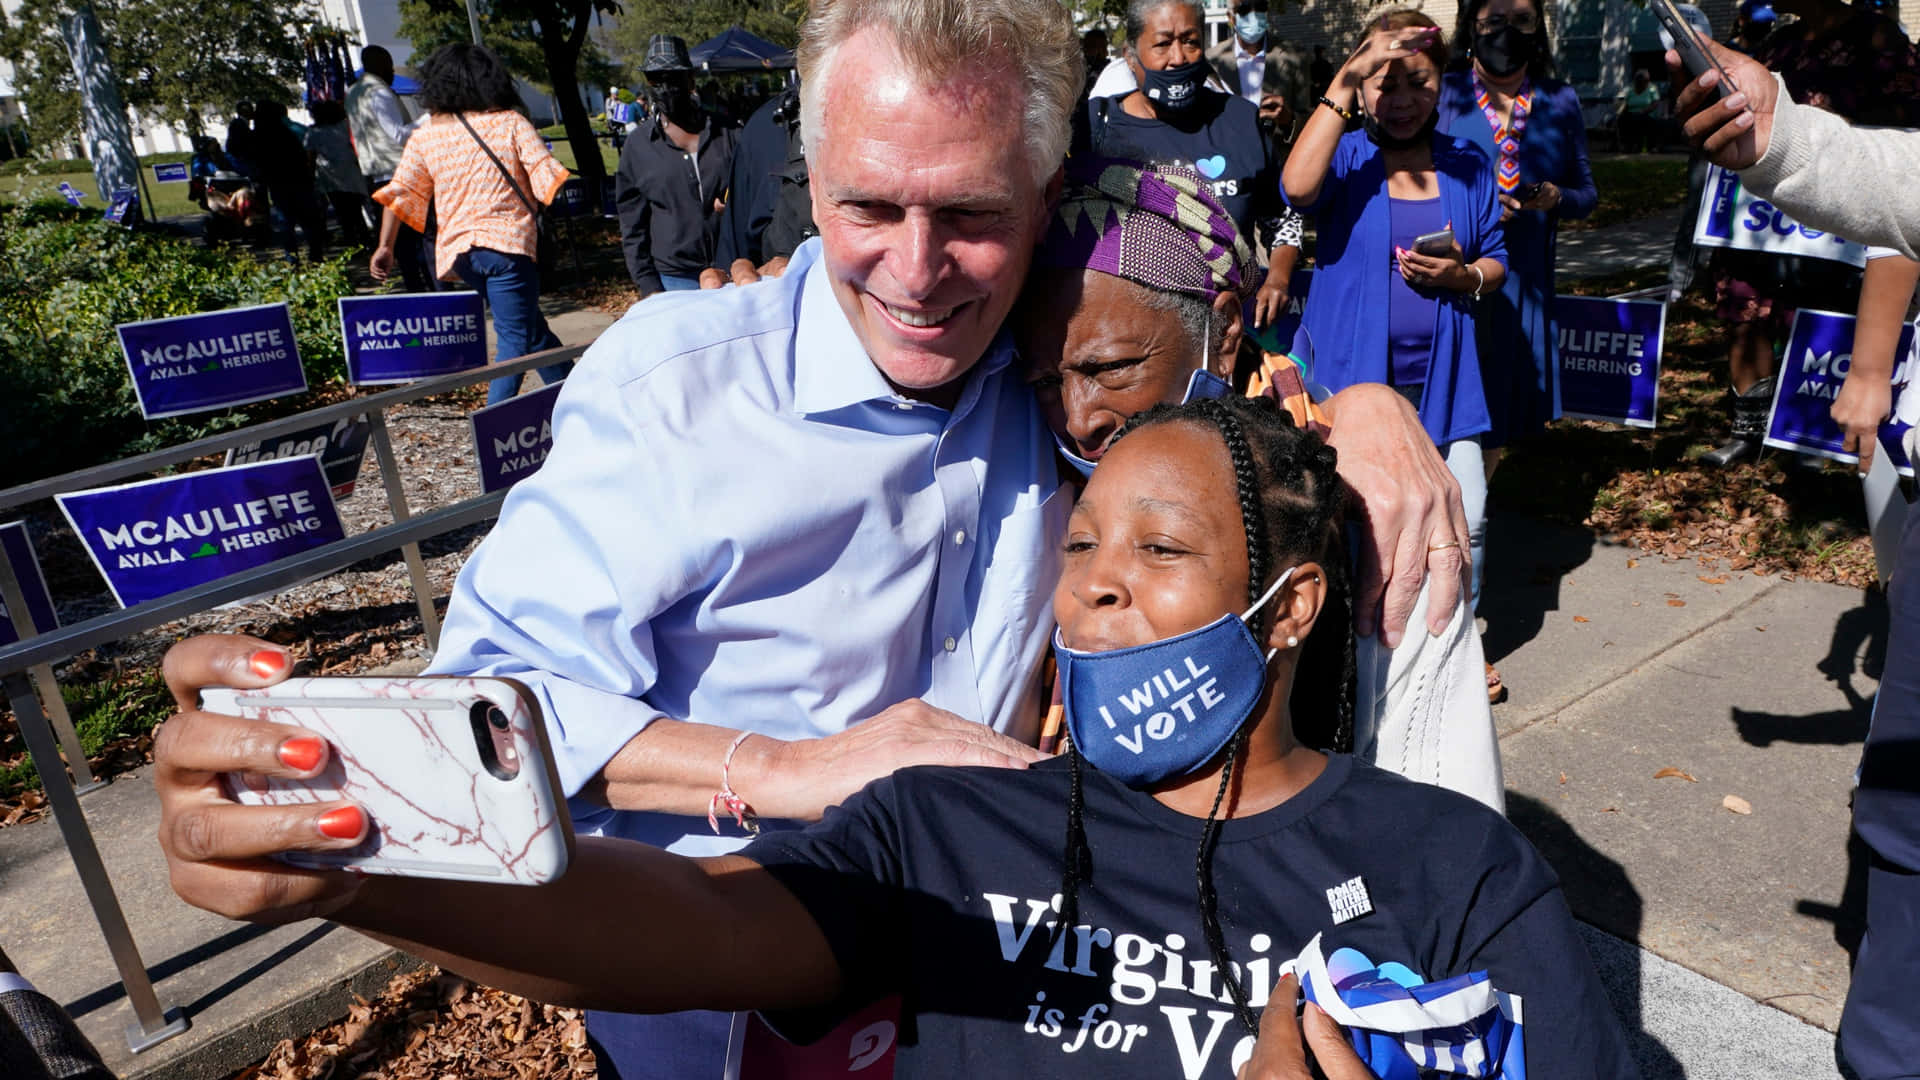 Terry McAuliffe Captures a Selfie Moment with Supporters Wallpaper